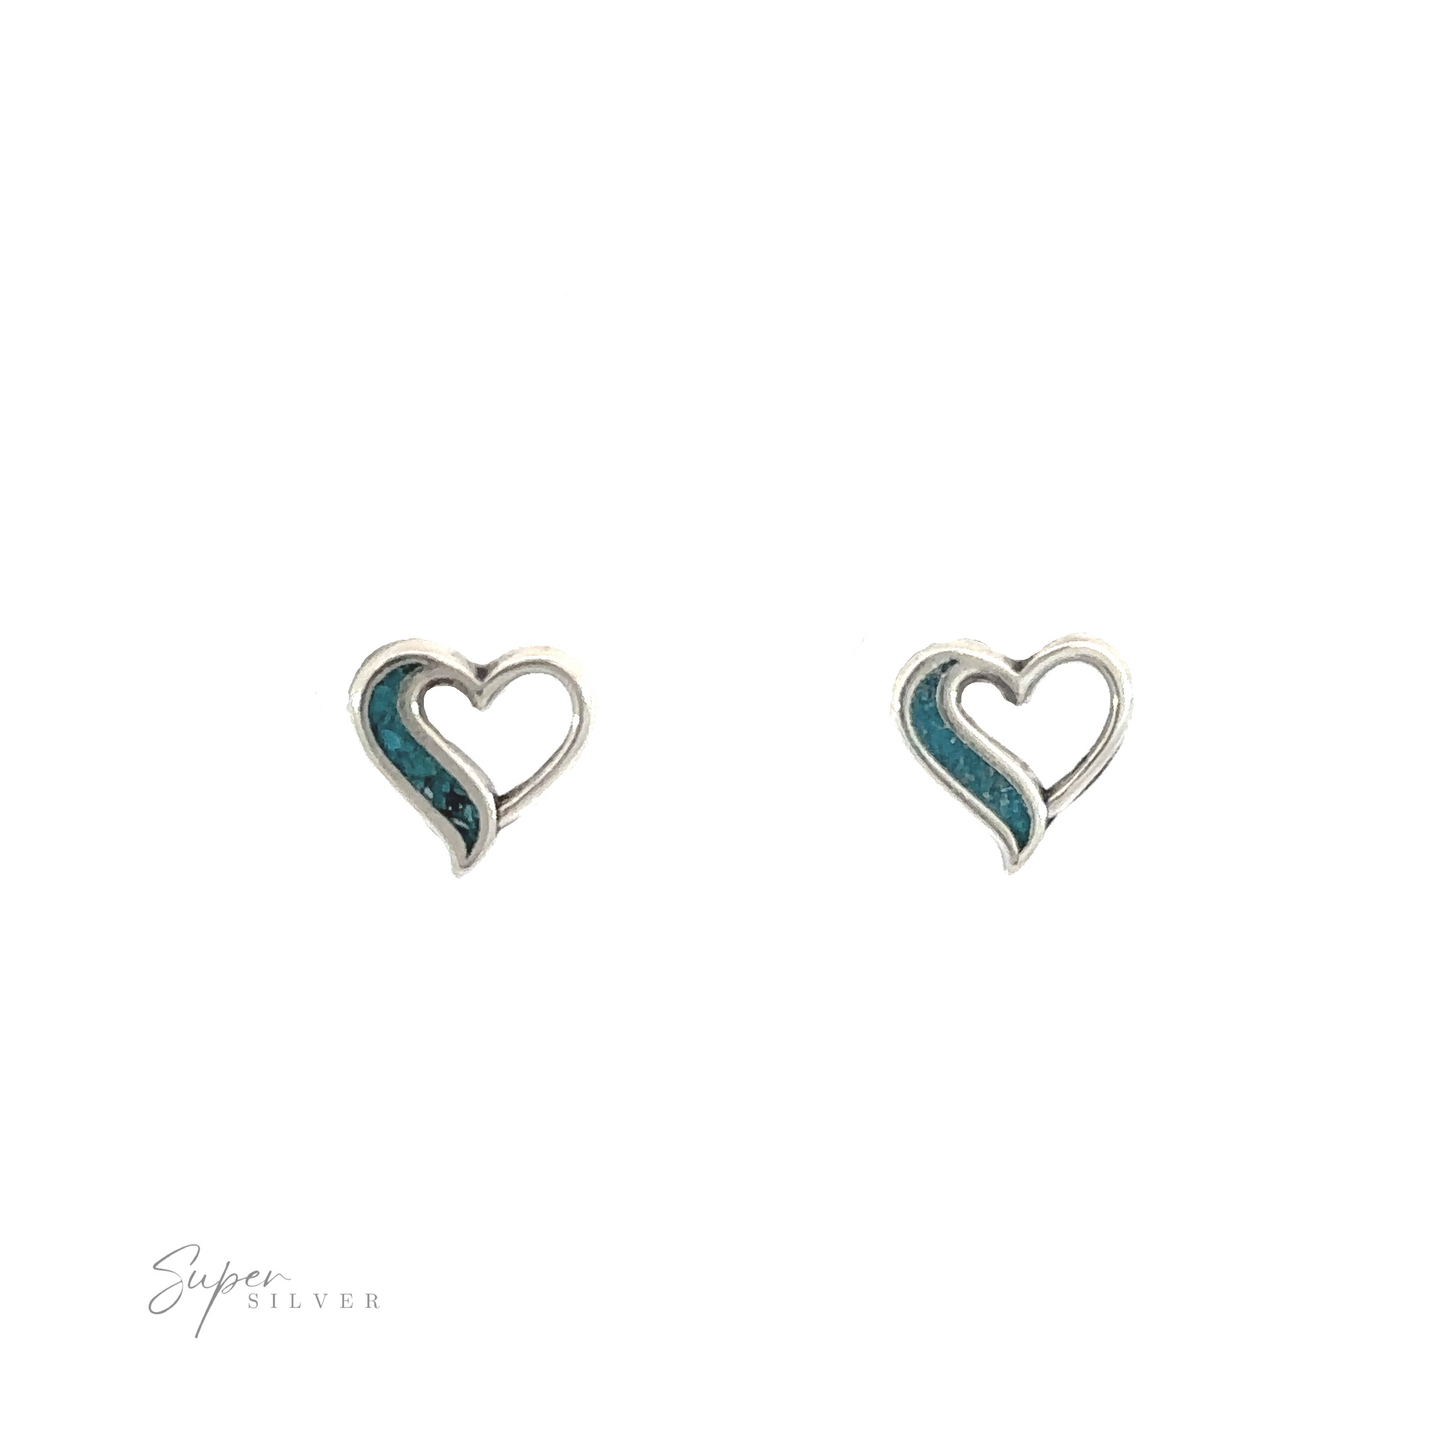 A pair of Turquoise Heart Outline Studs with turquoise accents on a white background.